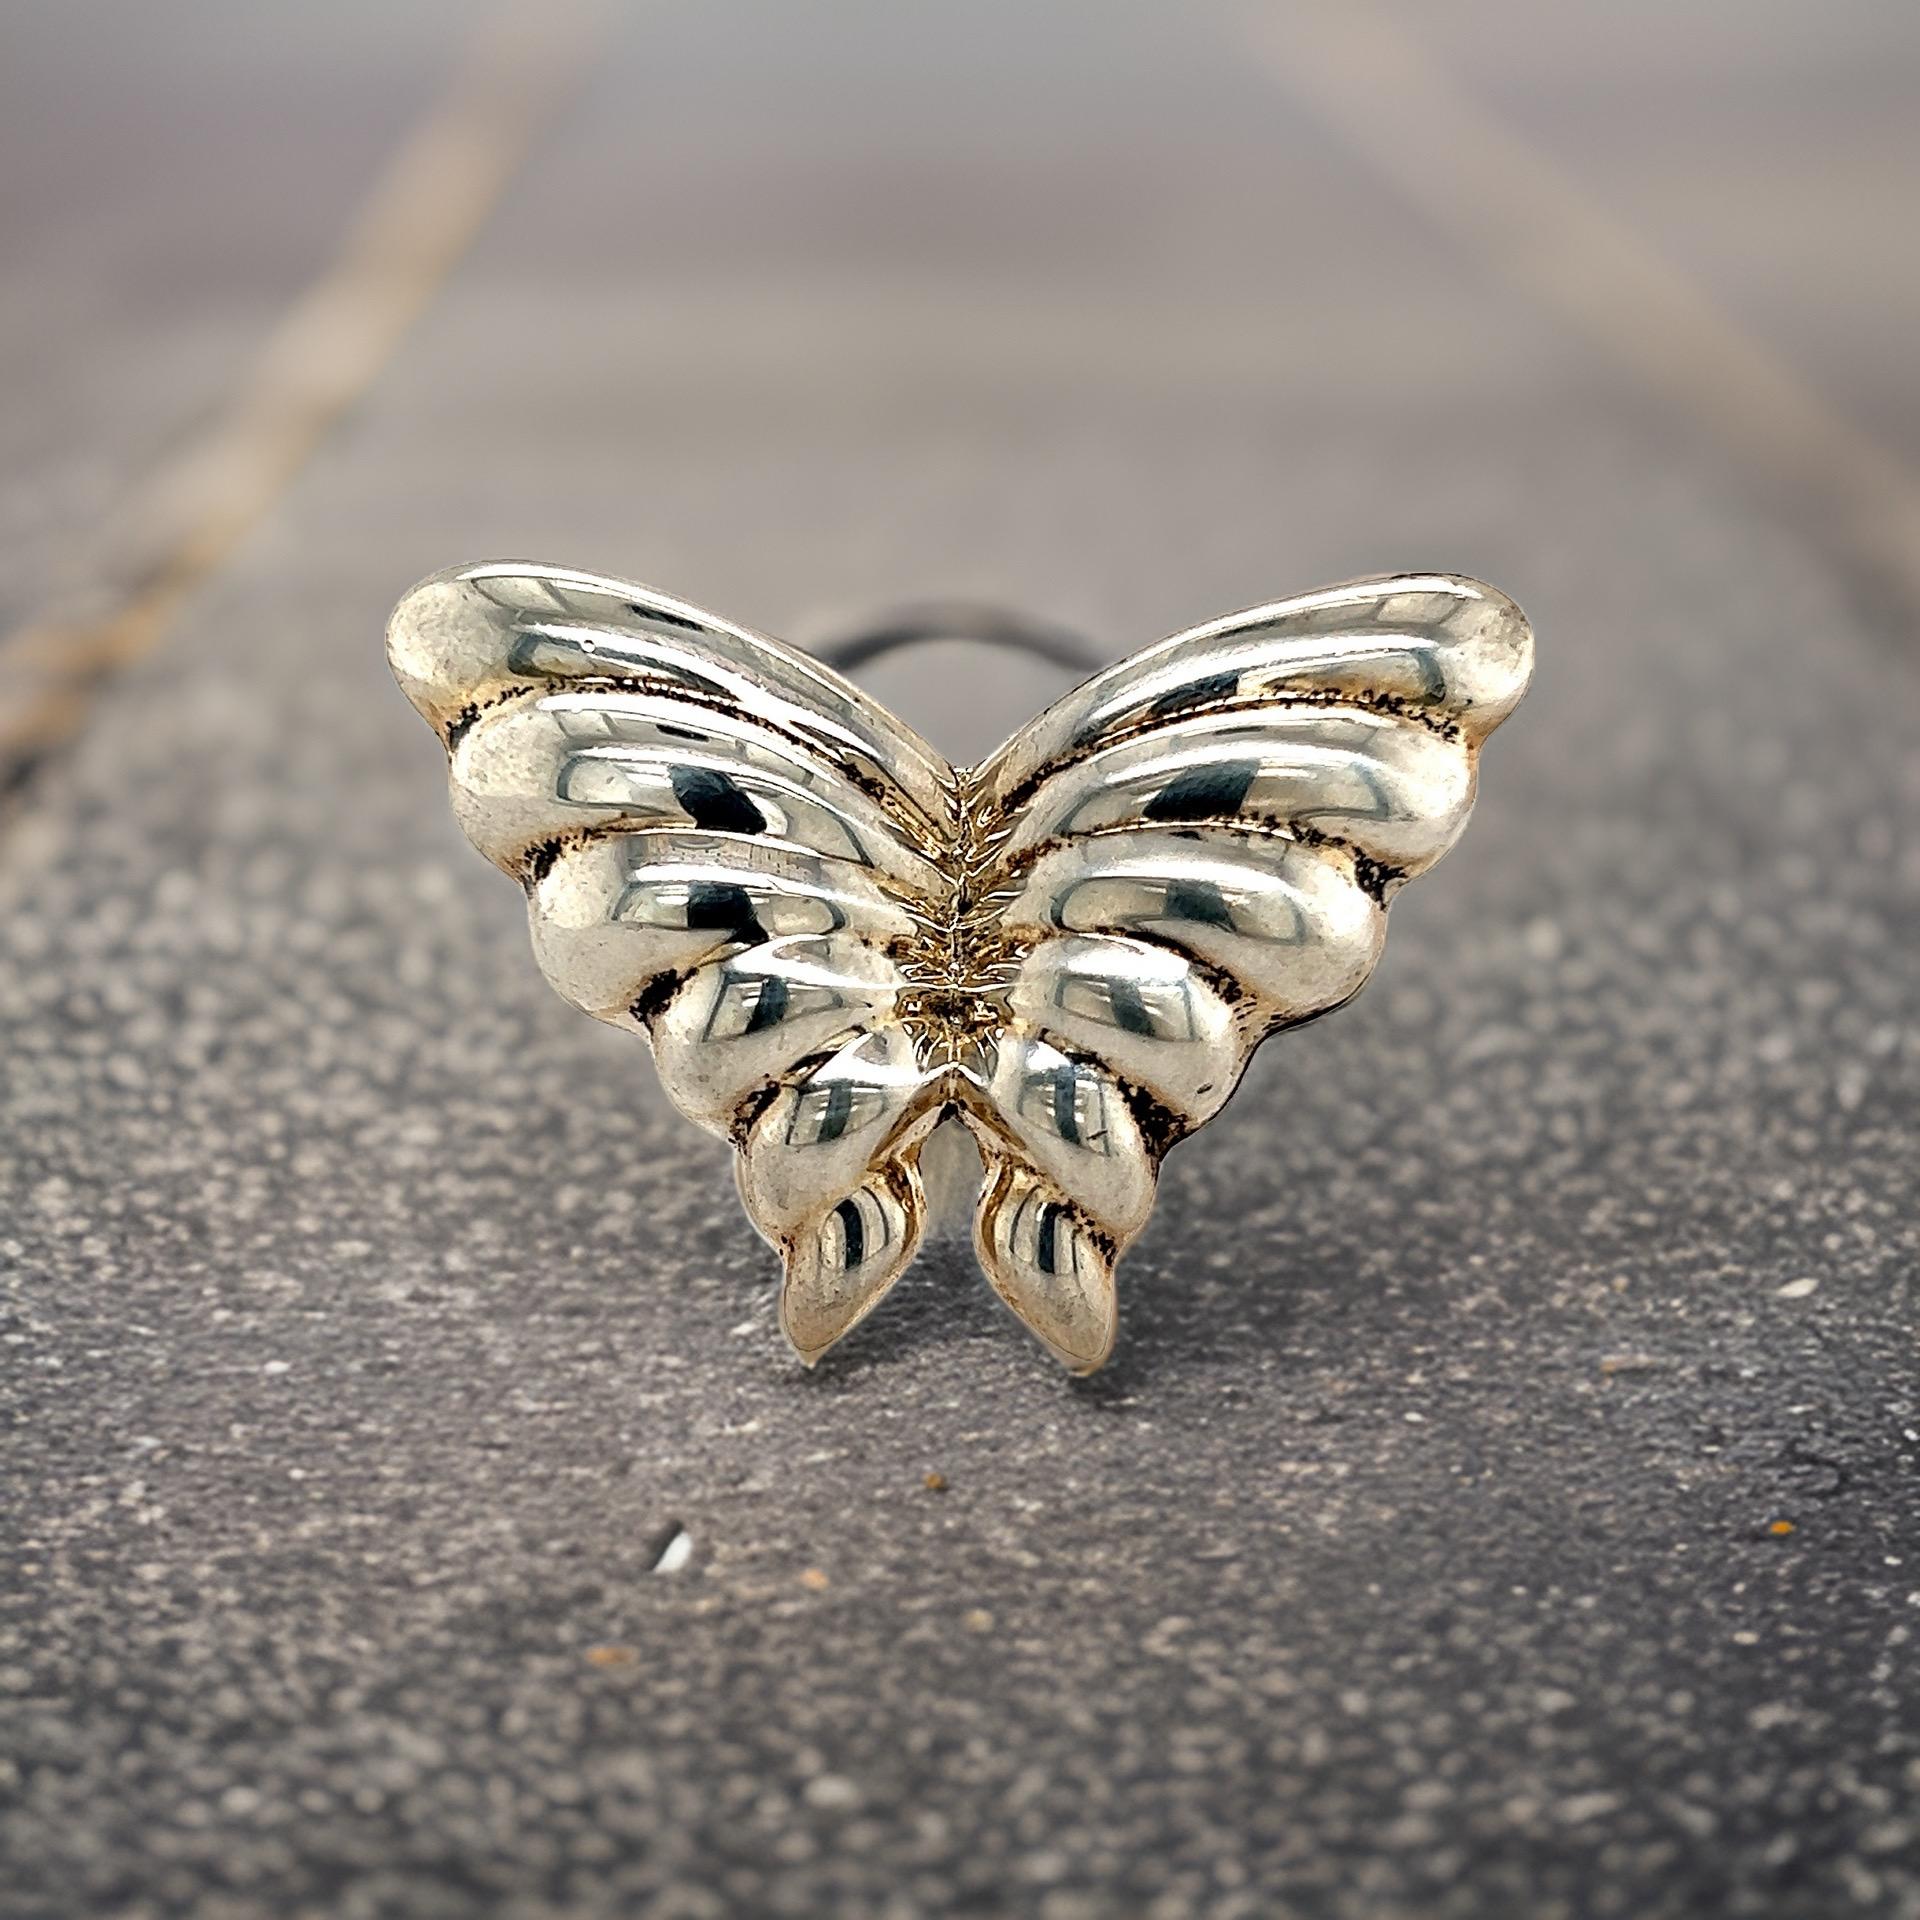 Authentic Tiffany & Co Estate Puffed Butterfly Brooch Pin Sterling Silver TIF516

TRUSTED SELLER SINCE 2002

PLEASE SEE OUR HUNDREDS OF POSITIVE FEEDBACKS FROM OUR CLIENTS!!

FREE SHIPPING!!

DETAILS
Style: Butterfly Brooch
Weight: 10.3 Grams
Metal: